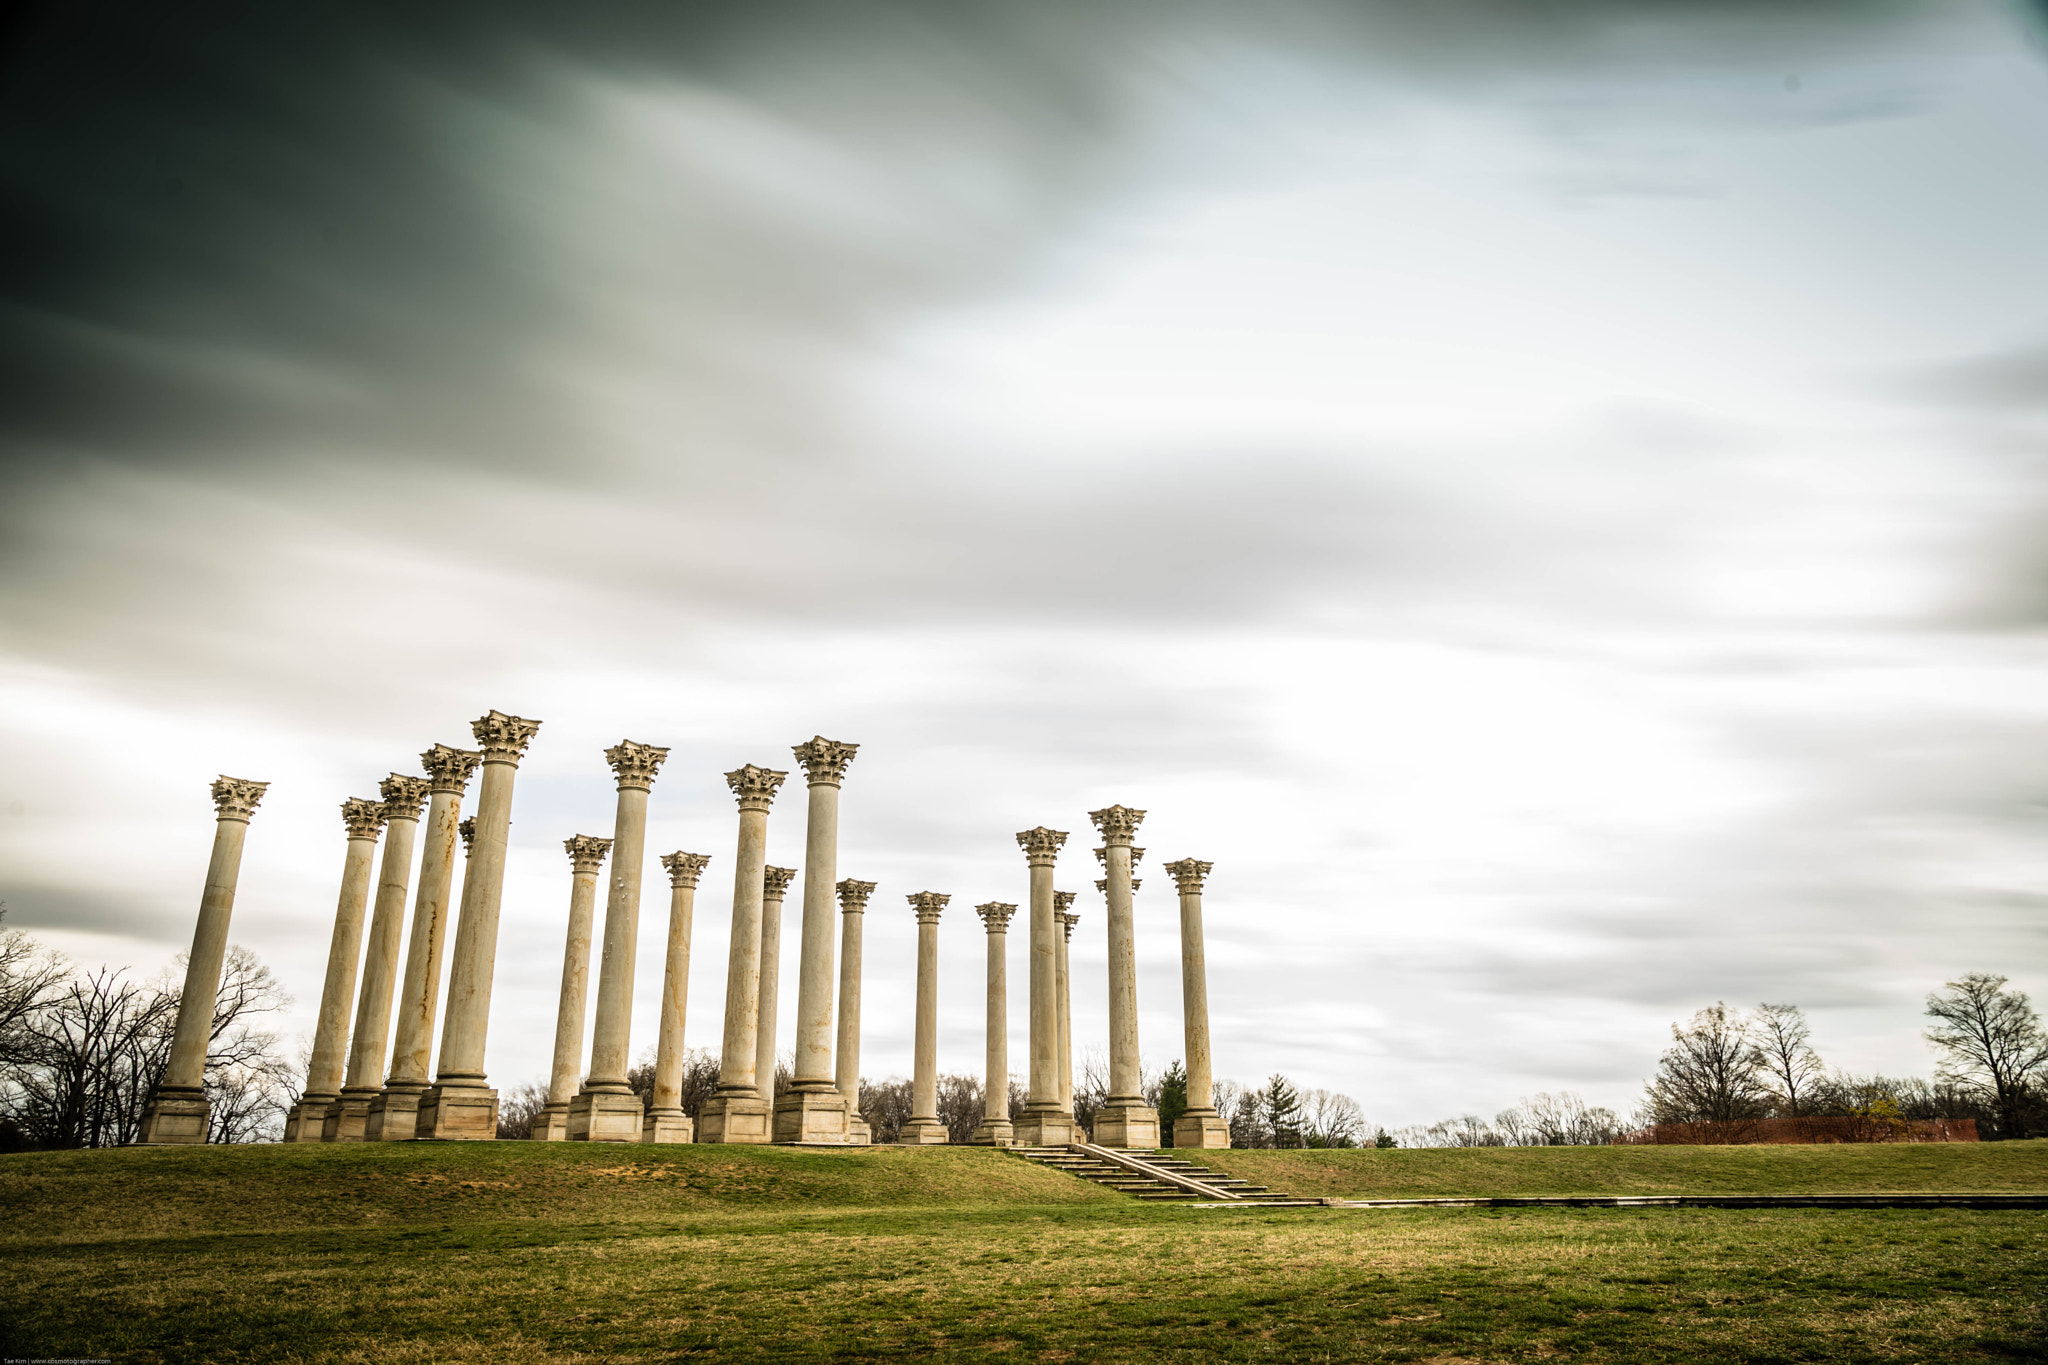 Sony a7 II sample photo. The national capitol columns photography